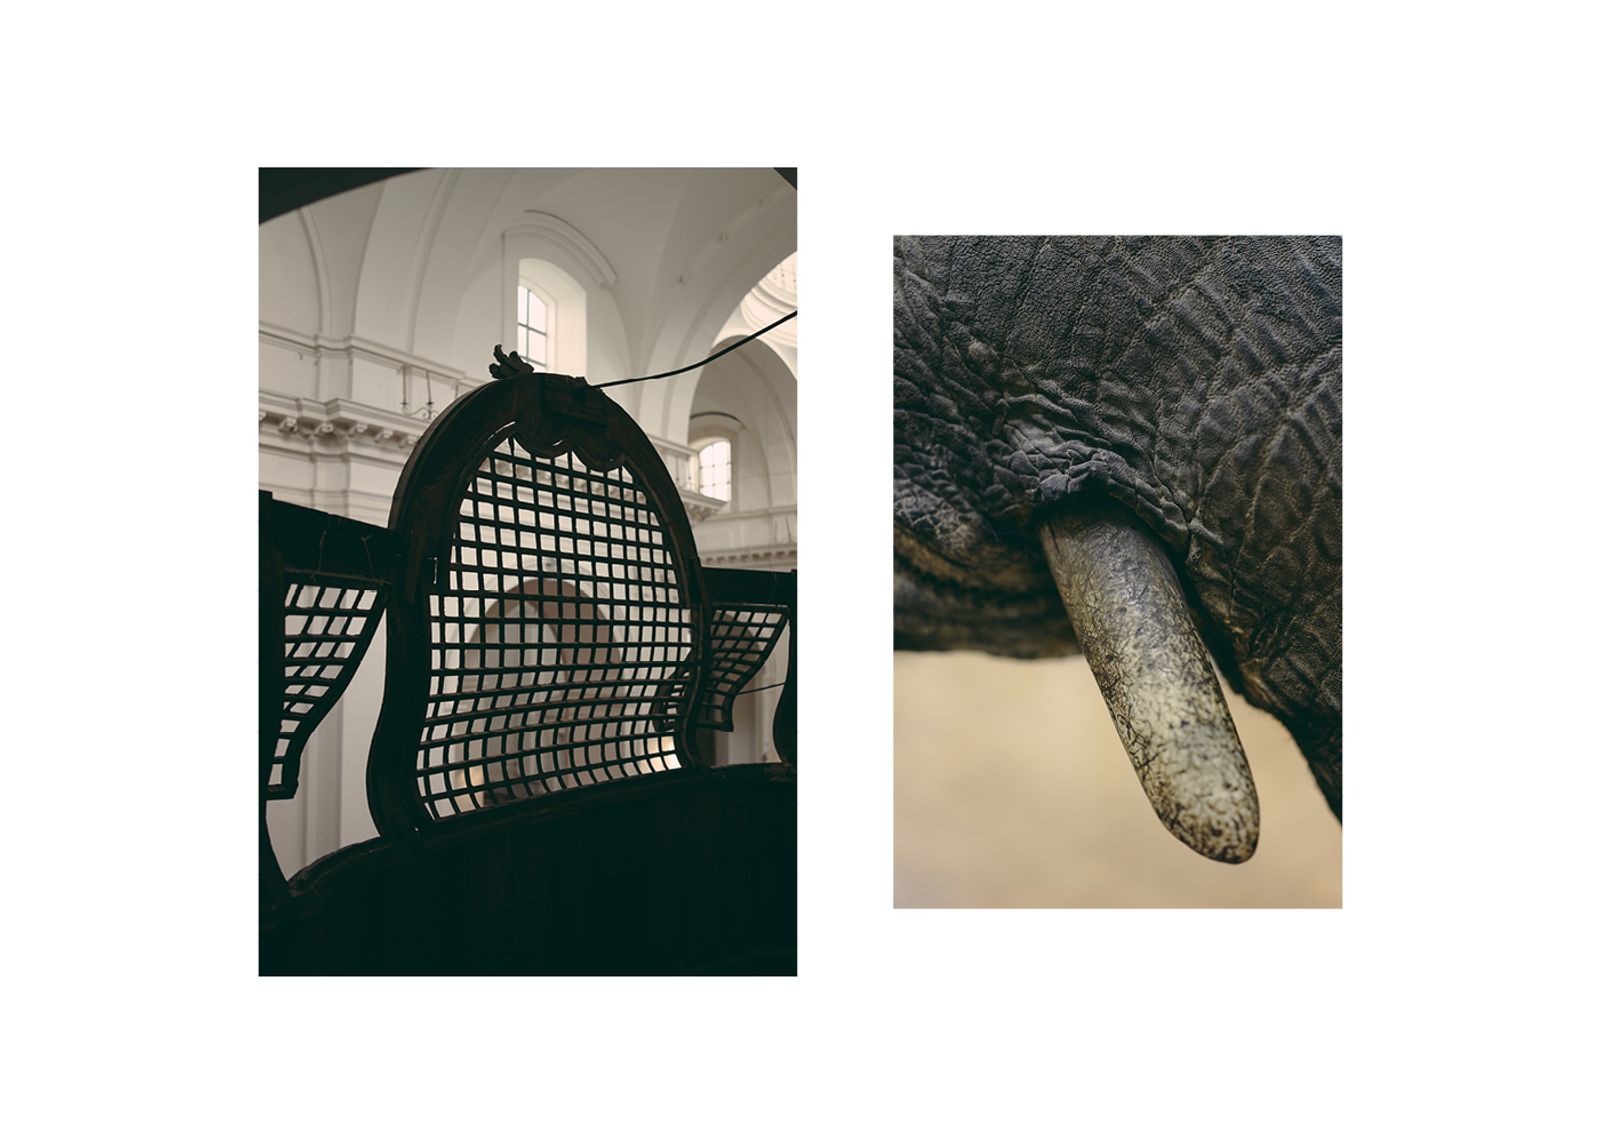 © Francesca Todde - Benedectine monastery of San Nicolò l’Arena in Catania; Elephant horn in the Natural History Museum of Catania.